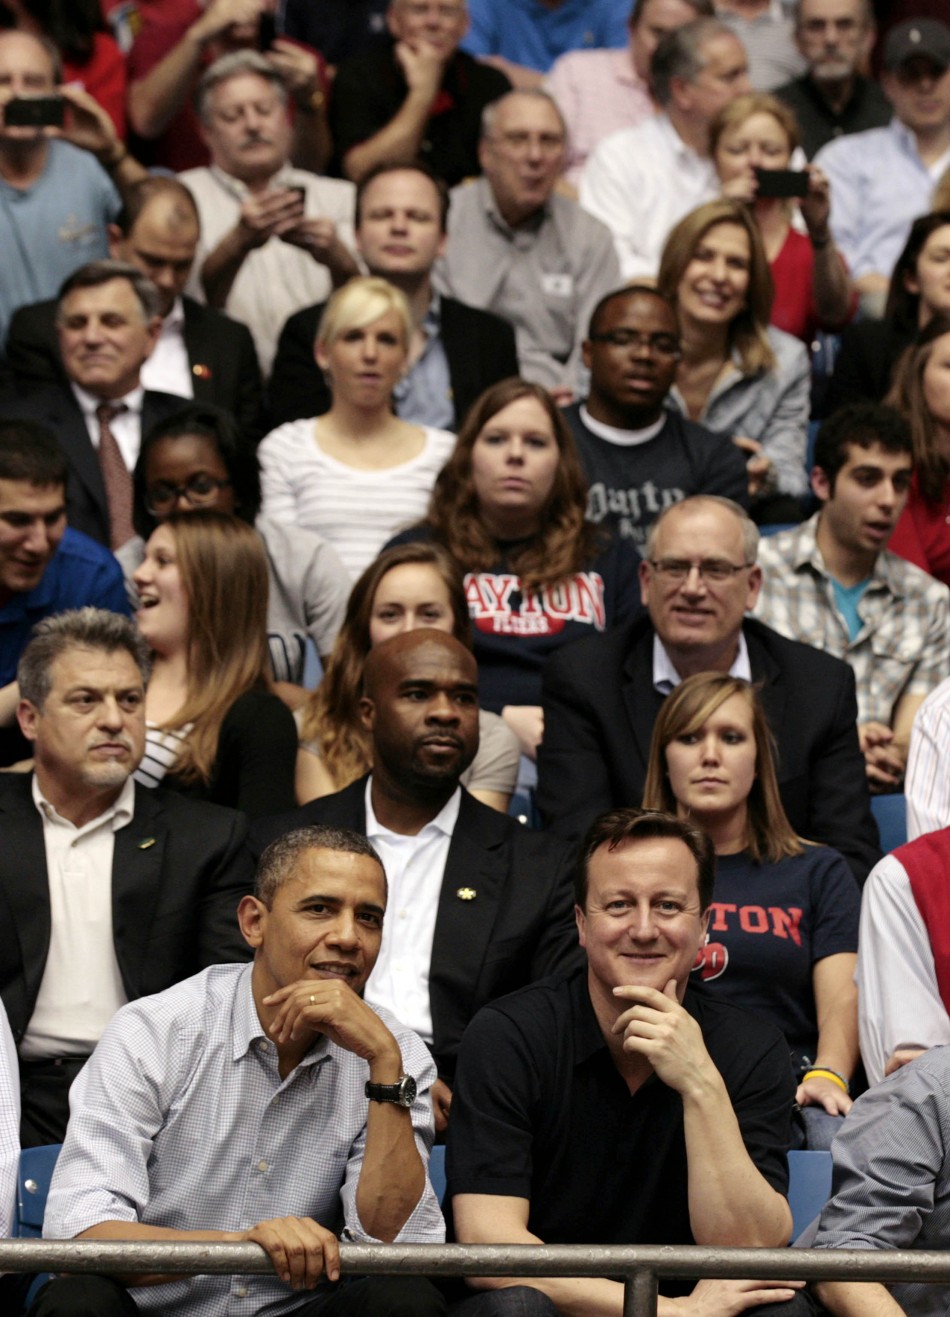 U.S. President Obama and British Prime Minister Cameron in crowd during NCAA basketball tournamnet